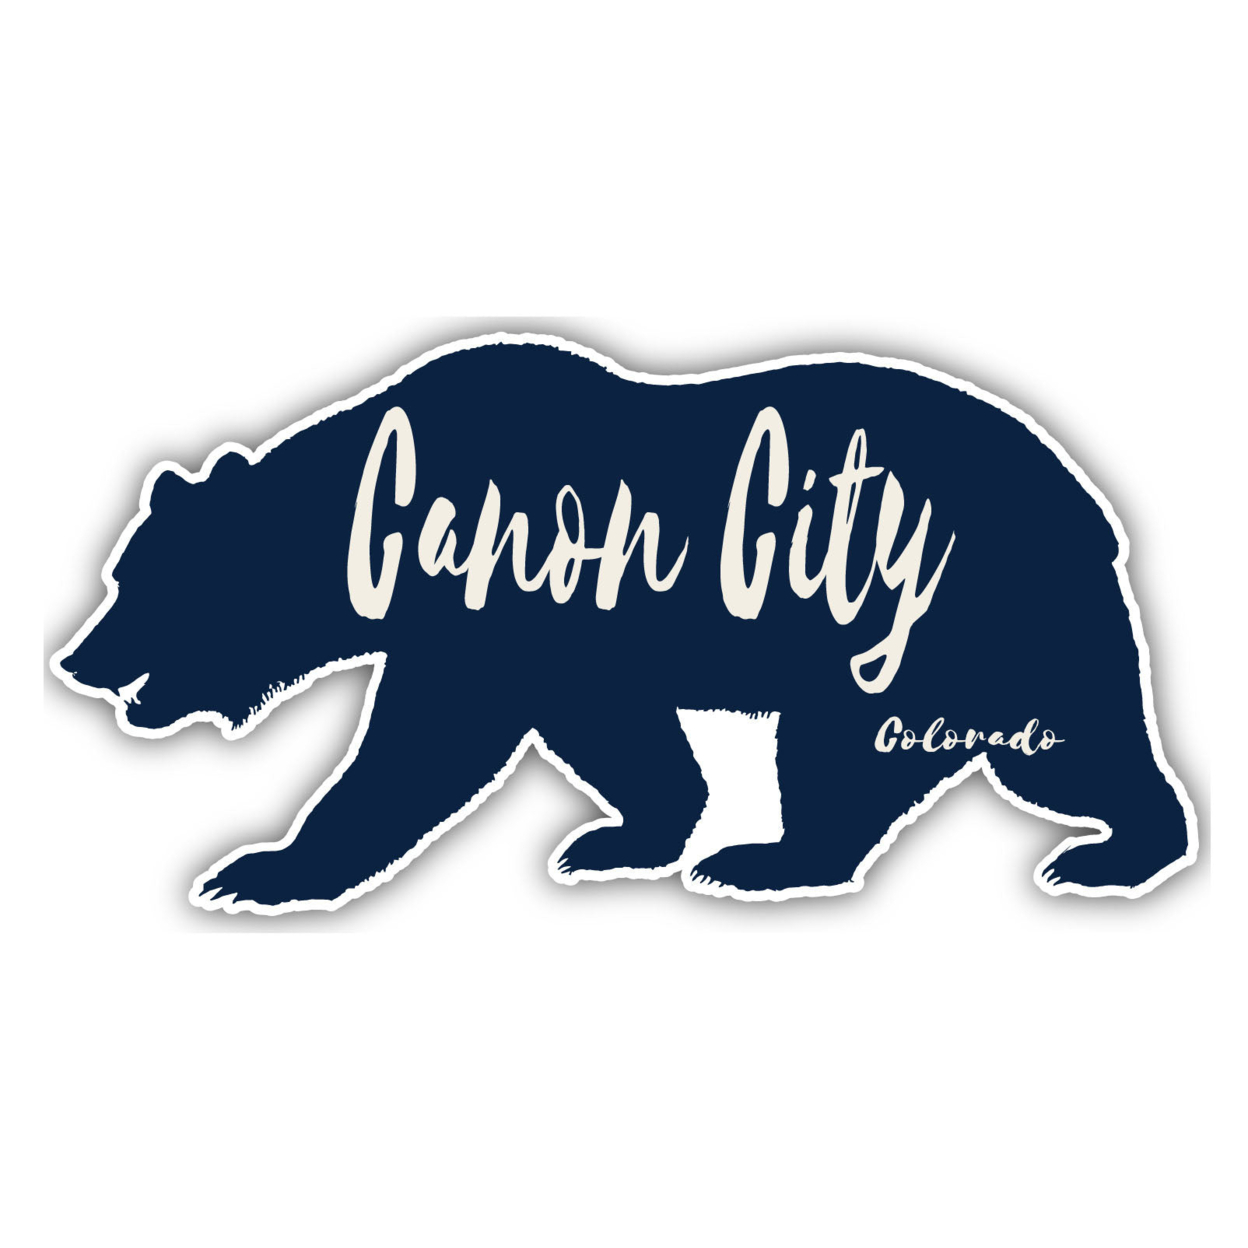 Canon City Colorado Souvenir Decorative Stickers (Choose Theme And Size) - 4-Pack, 8-Inch, Camp Life